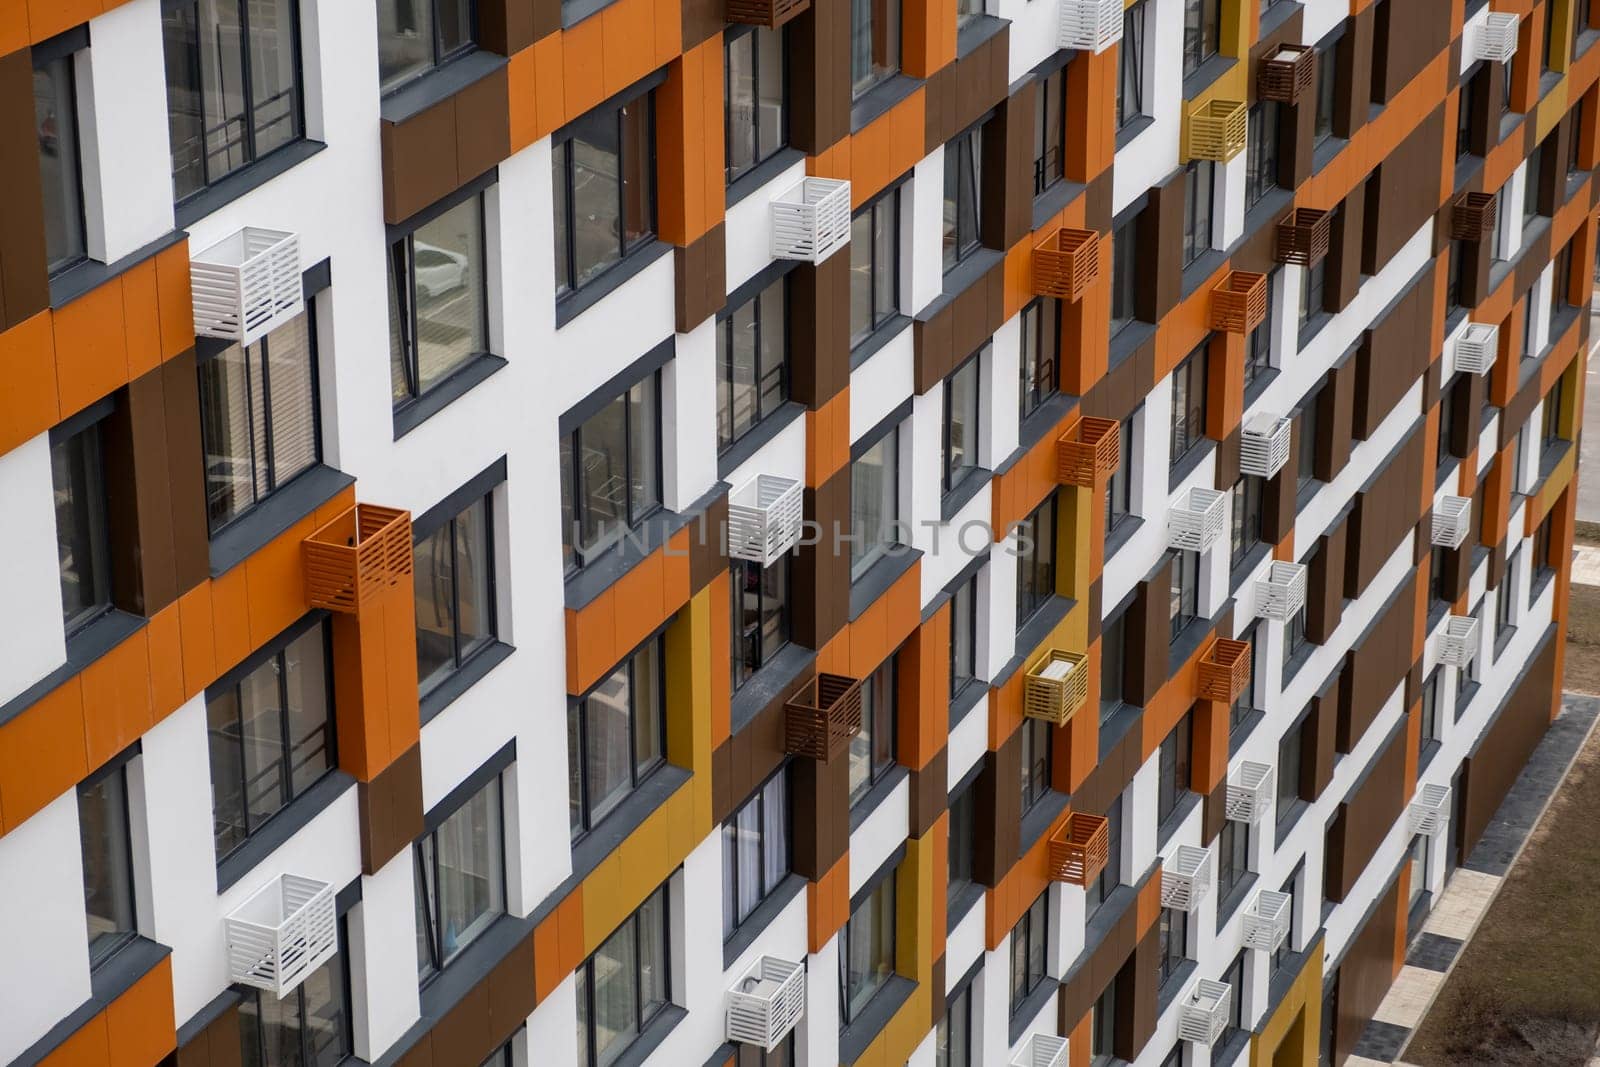 New apartment buildings with windows and balconies. Modern european complex by AnatoliiFoto